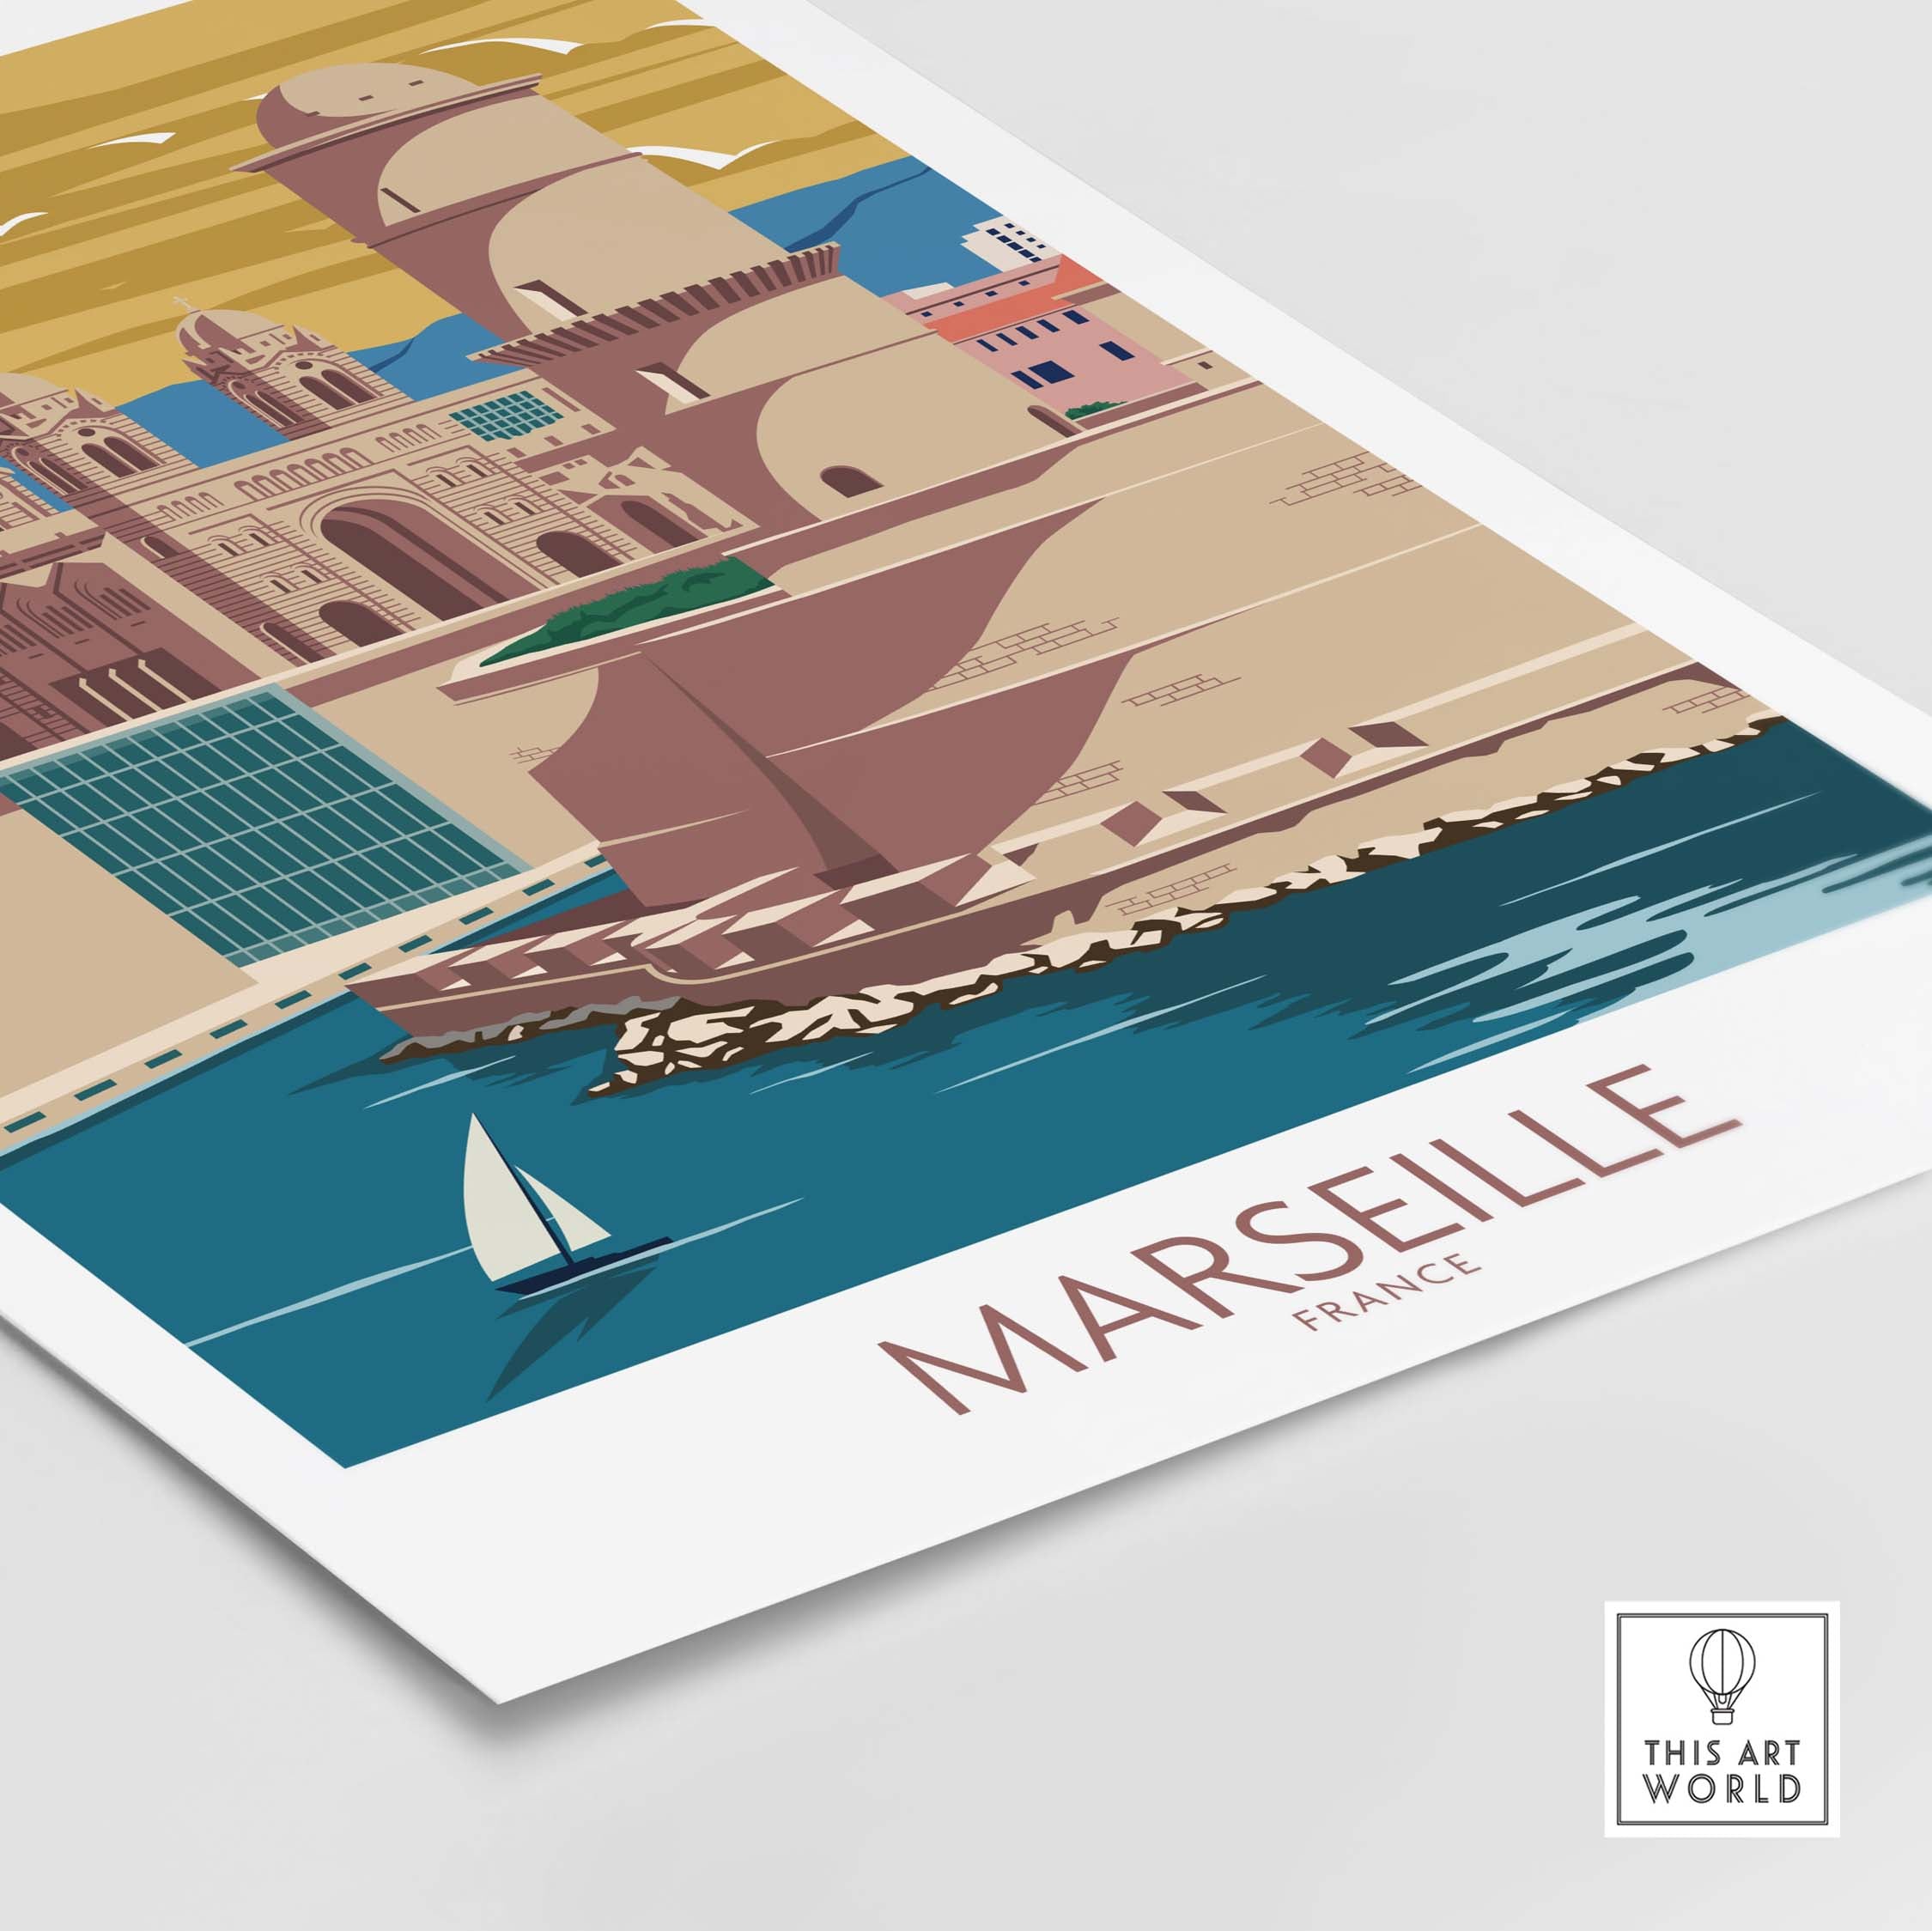 marseille poster france wall art